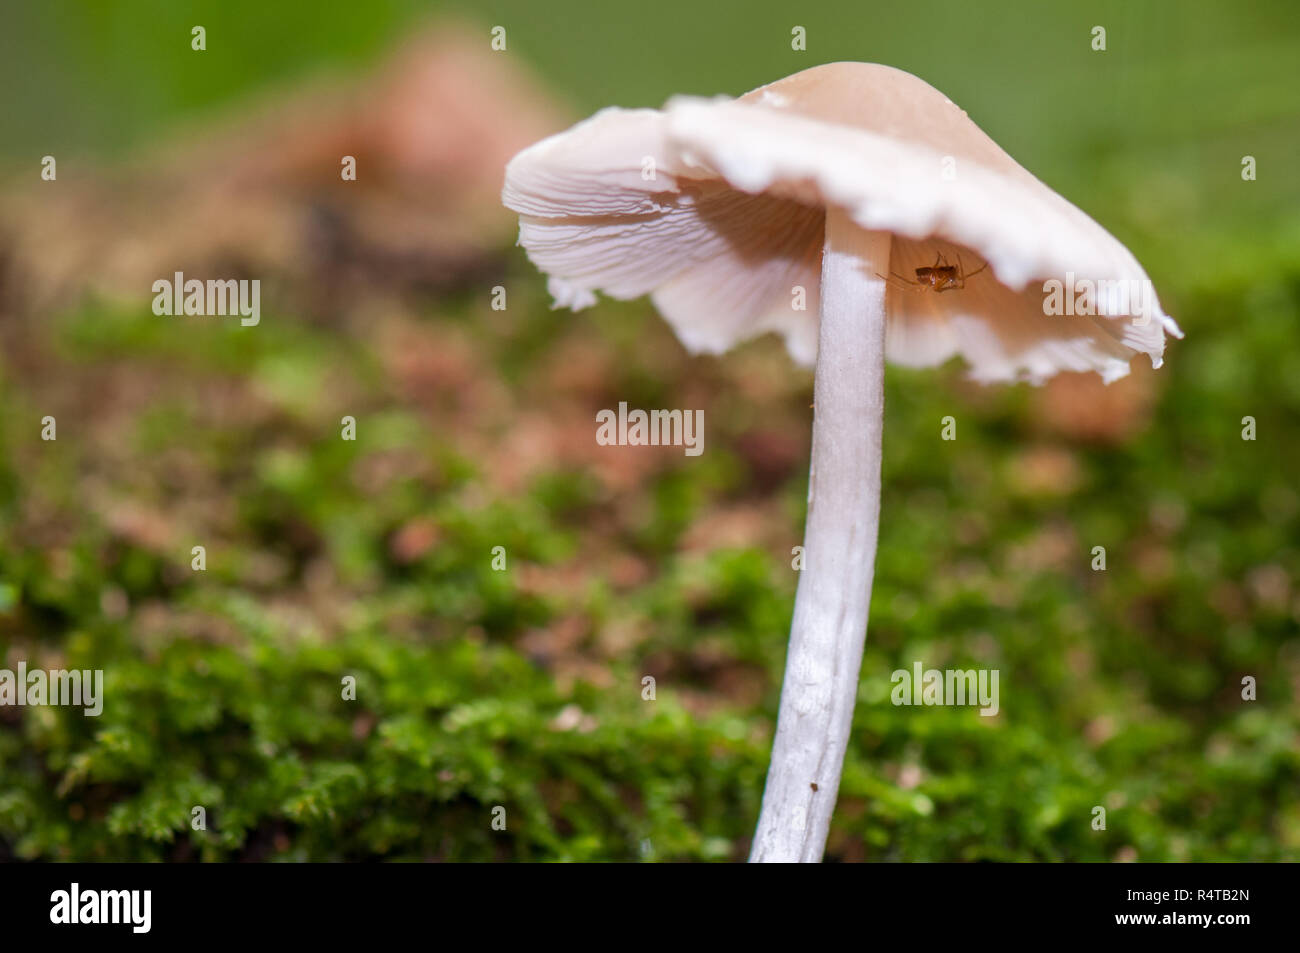 A small white mushroom (inocybe geophylla) is providing shelter for a spider during autumn in the forest. Stock Photo